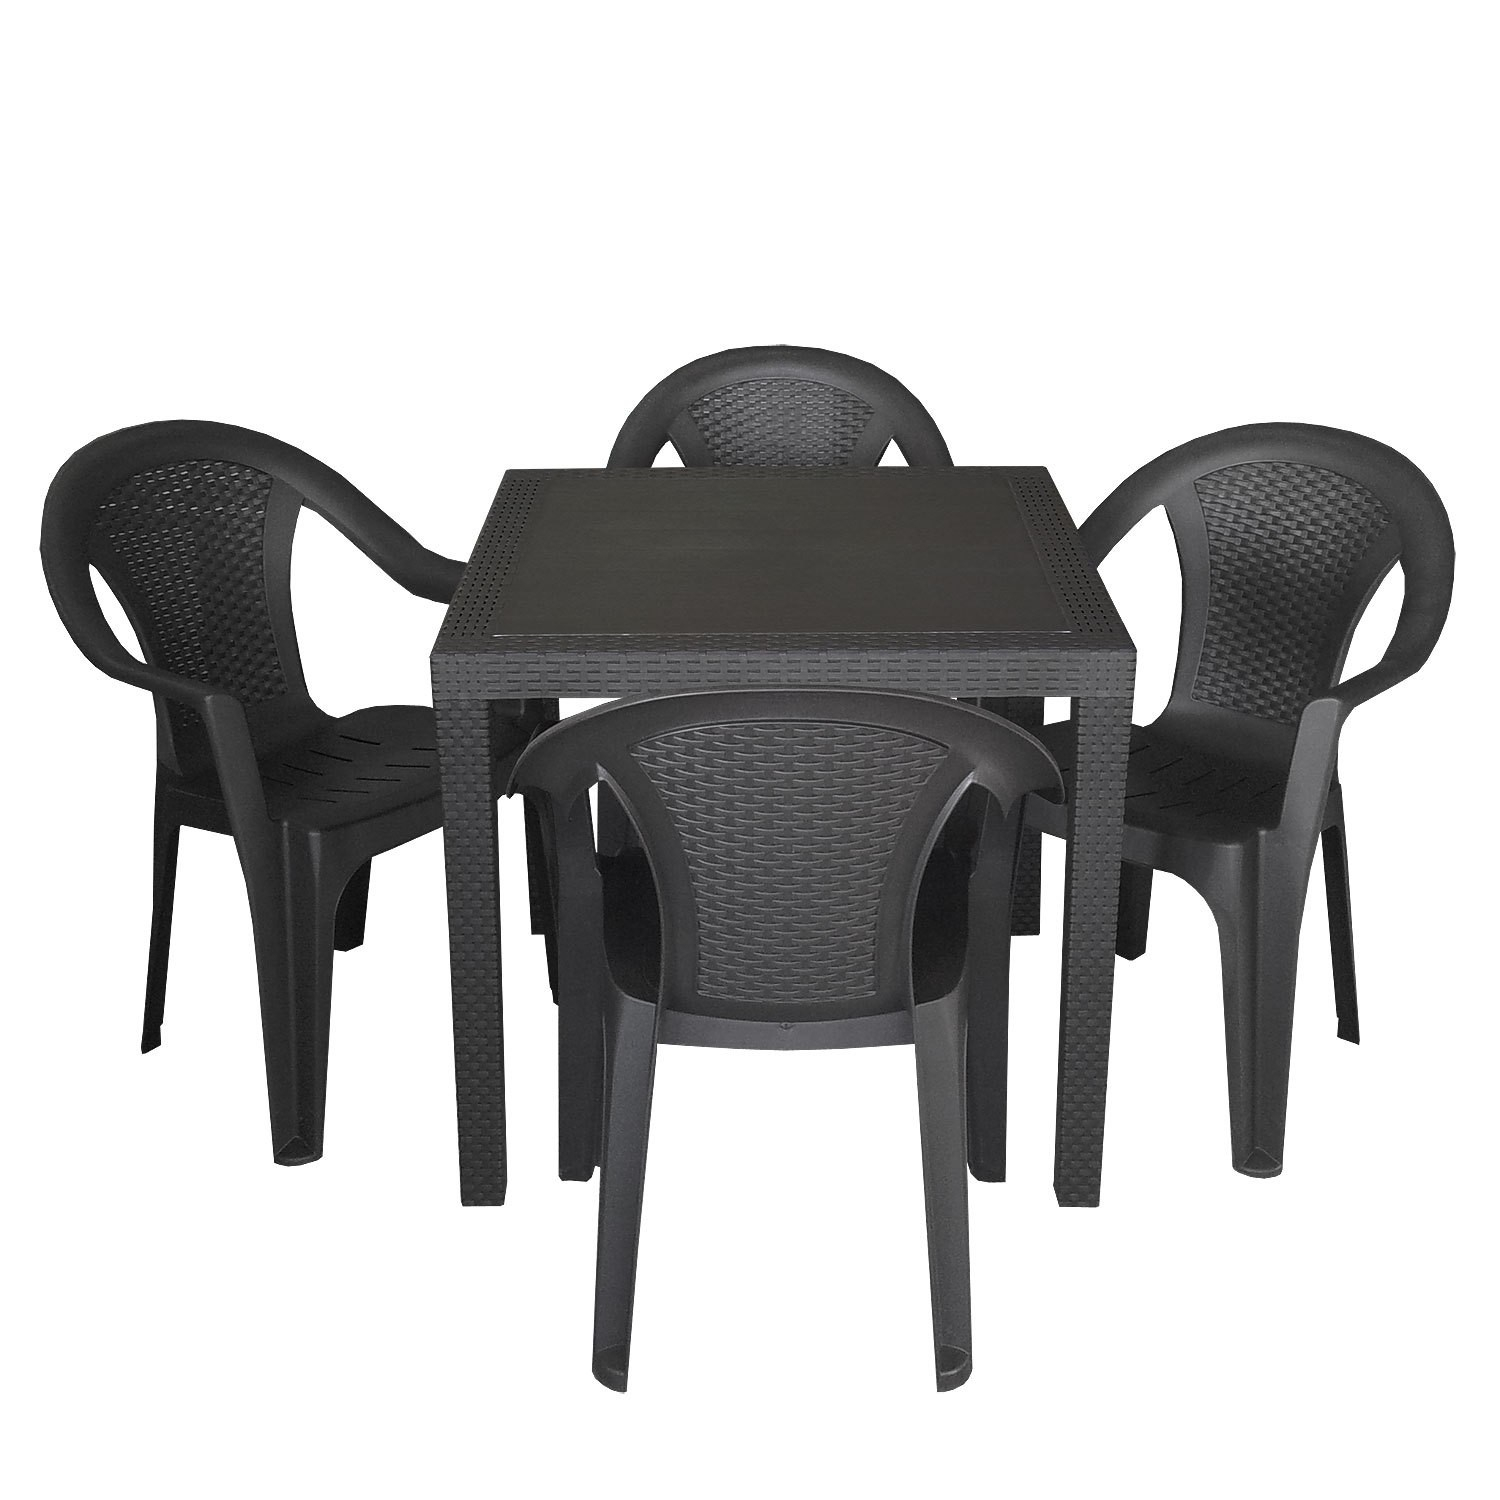 Bundle Garden Balcony Furniture Set Of 5 Chair Set 79 X 79 Cm Wicker Look All Plastic Patio Furniture Stackable Chair Black Ceres Webshop throughout proportions 1500 X 1500